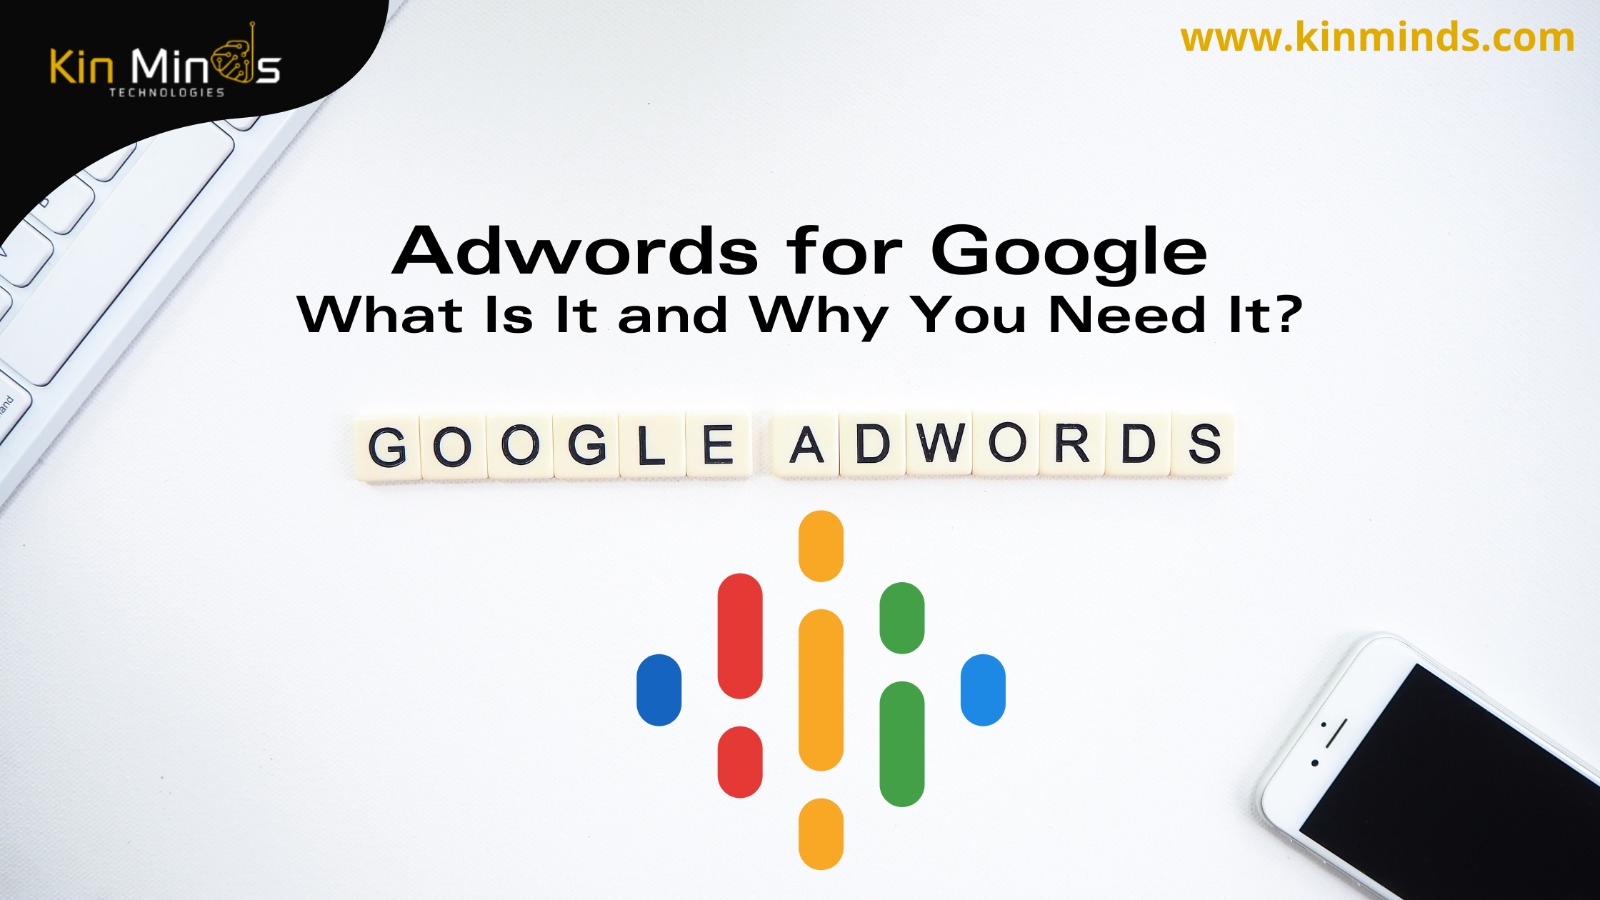 Adwords for Google – What Is It and Why You Need It?